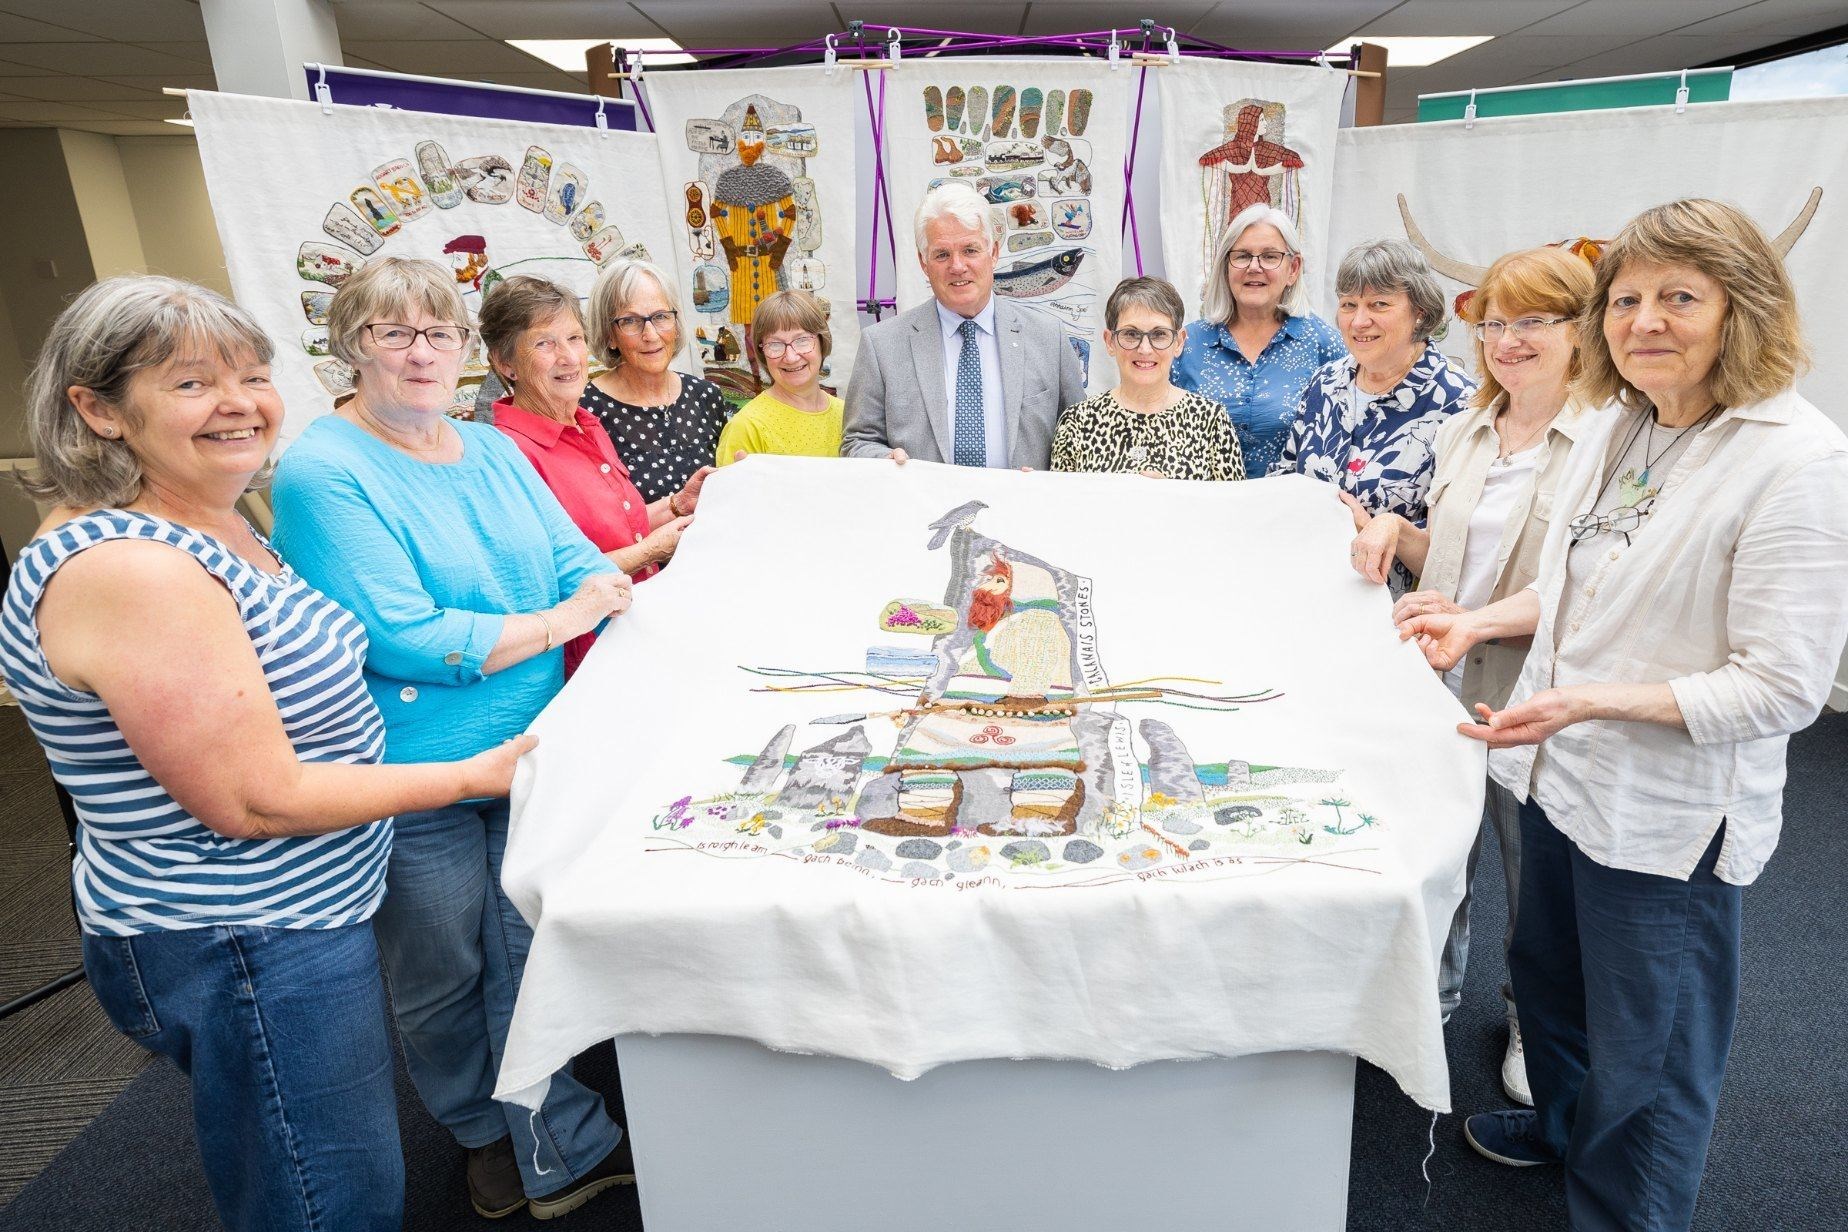 Calanais Stones tapestry panel, Isle of Lewis: Cllr Ian Brown (centre), Pictured (left to right) are regular helpers in the Inverness hub, from around Inverness, Black Isle and Dornoch: Bernadette Finnie, Kathleen Dale, Jill Barnes, Sue Gardiner, Margaret Clyne, Cllr Ian Brown, Jacqueline Smith, Alison Phimister, Kirsty Neilson, Mairi Murray, Sheena Norquay. Picture by: HLH/Paul Campbell Photography.